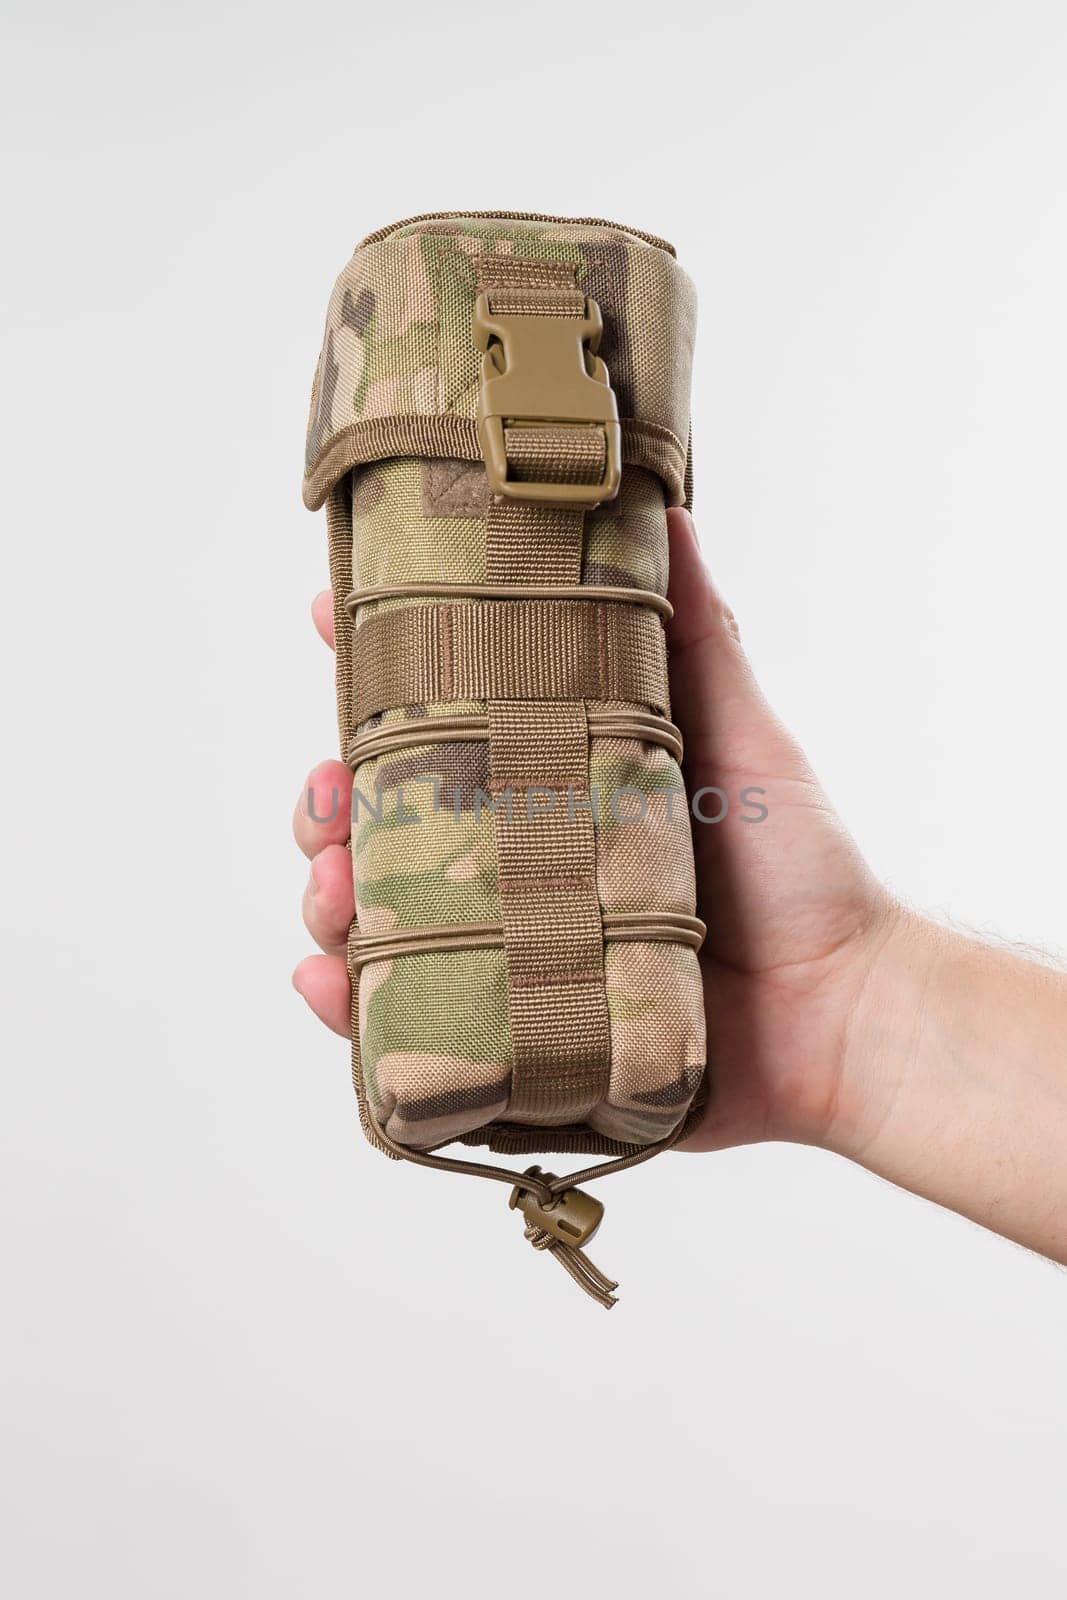 Man holding protective cover for monocular, military pixelated fabric, case isolated on white background.